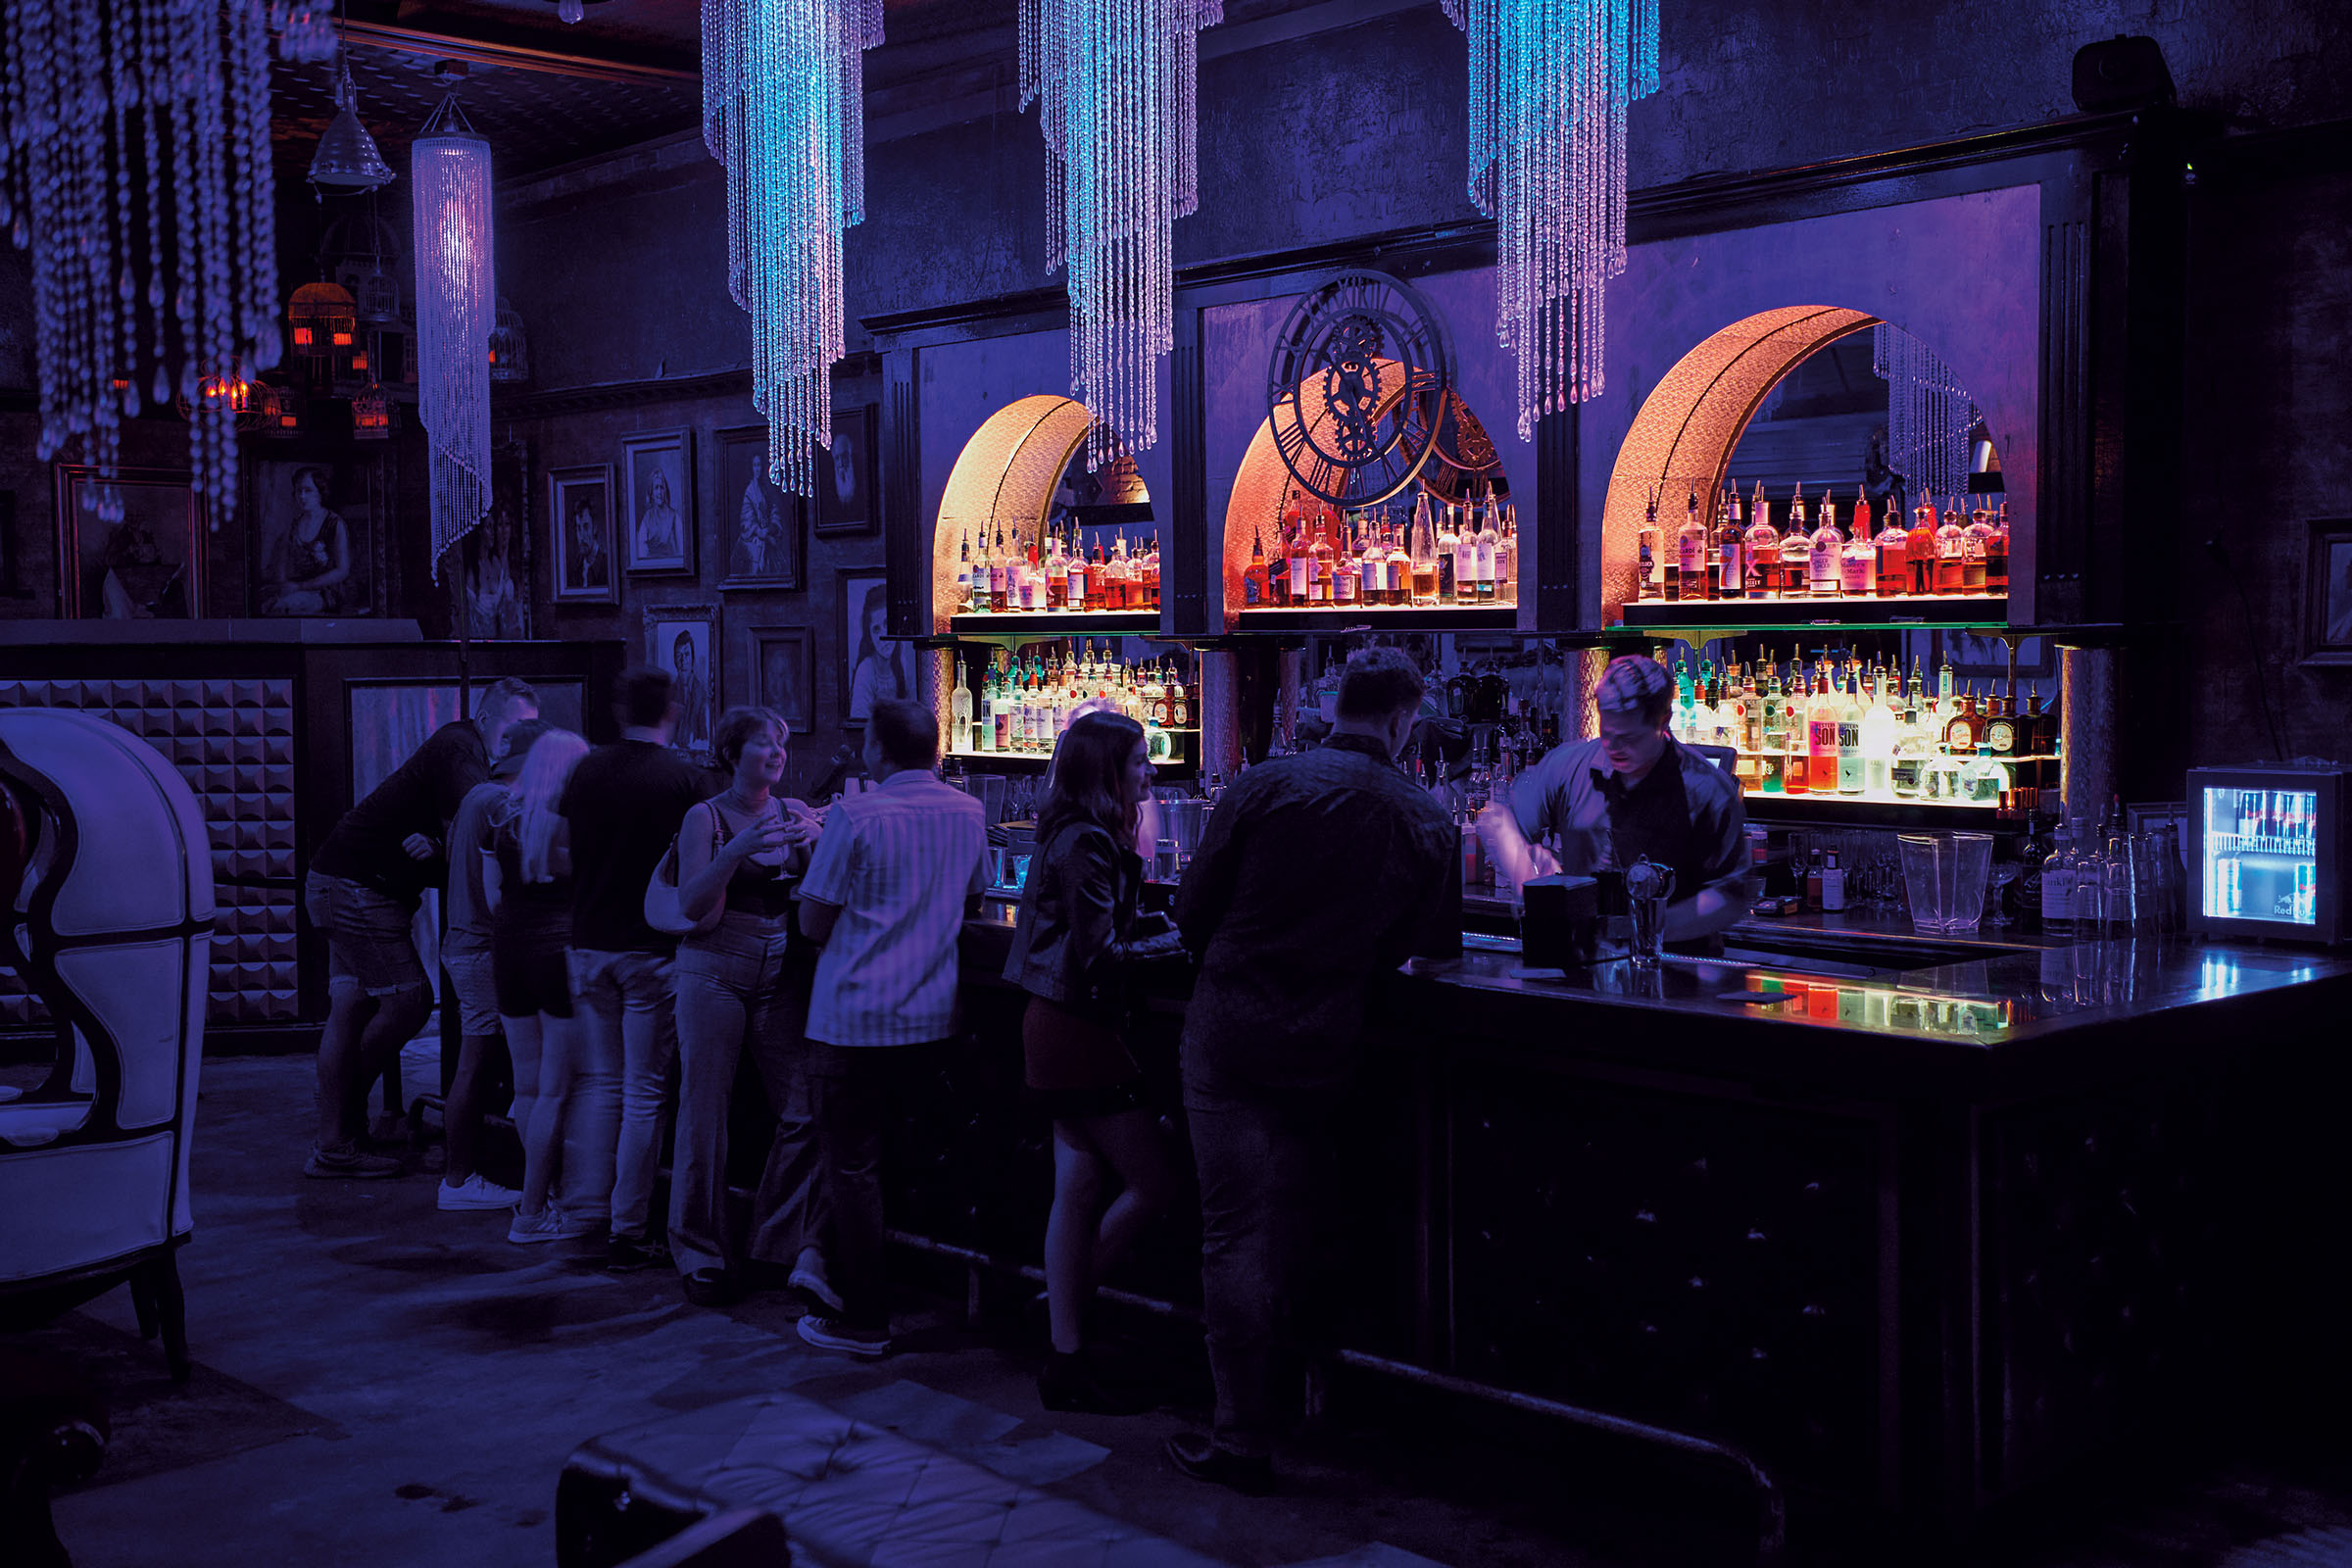 Orange, purple and blue tones in a muted, dark nightclub with chandeliers hanging from the ceiling